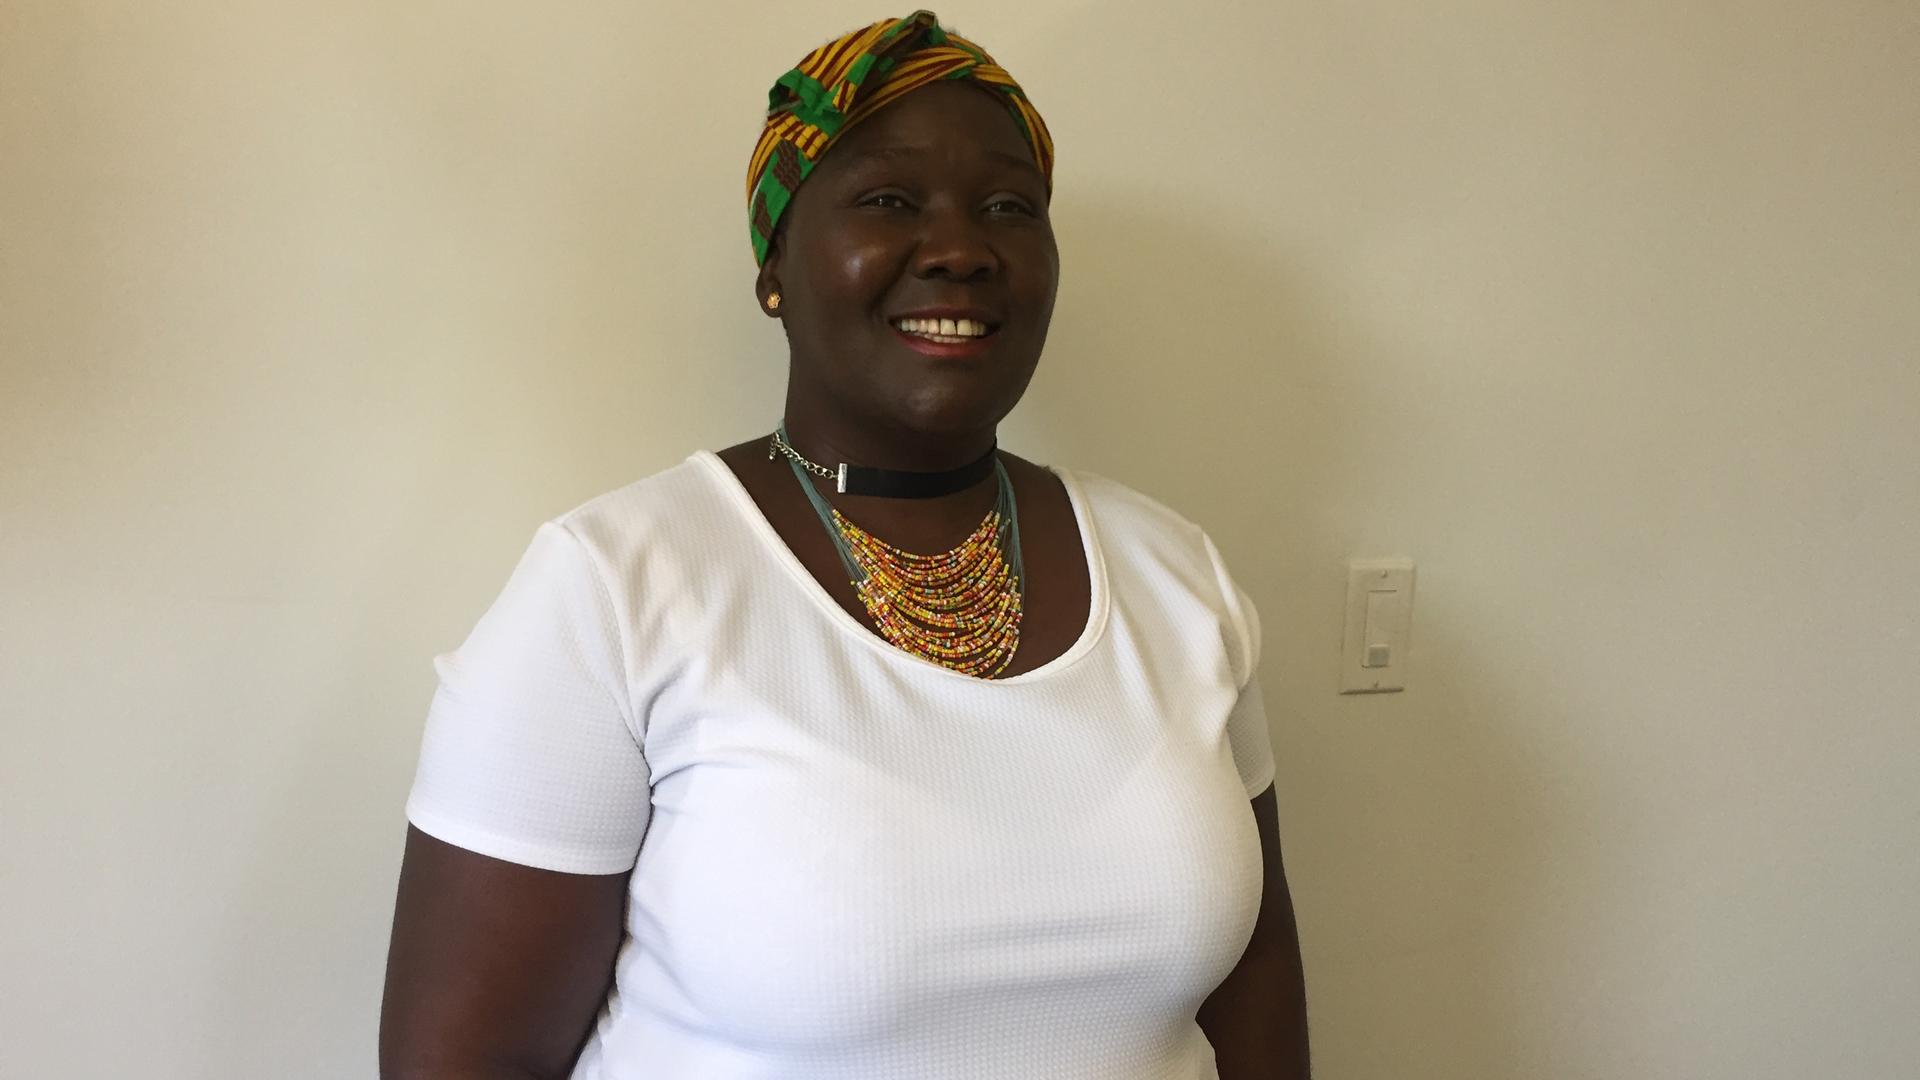 Fainess Lipenga was trafficked by her boss, a former diplomat in the US from Malawi. Now, Lipenga is an advocate for victims of human trafficking.